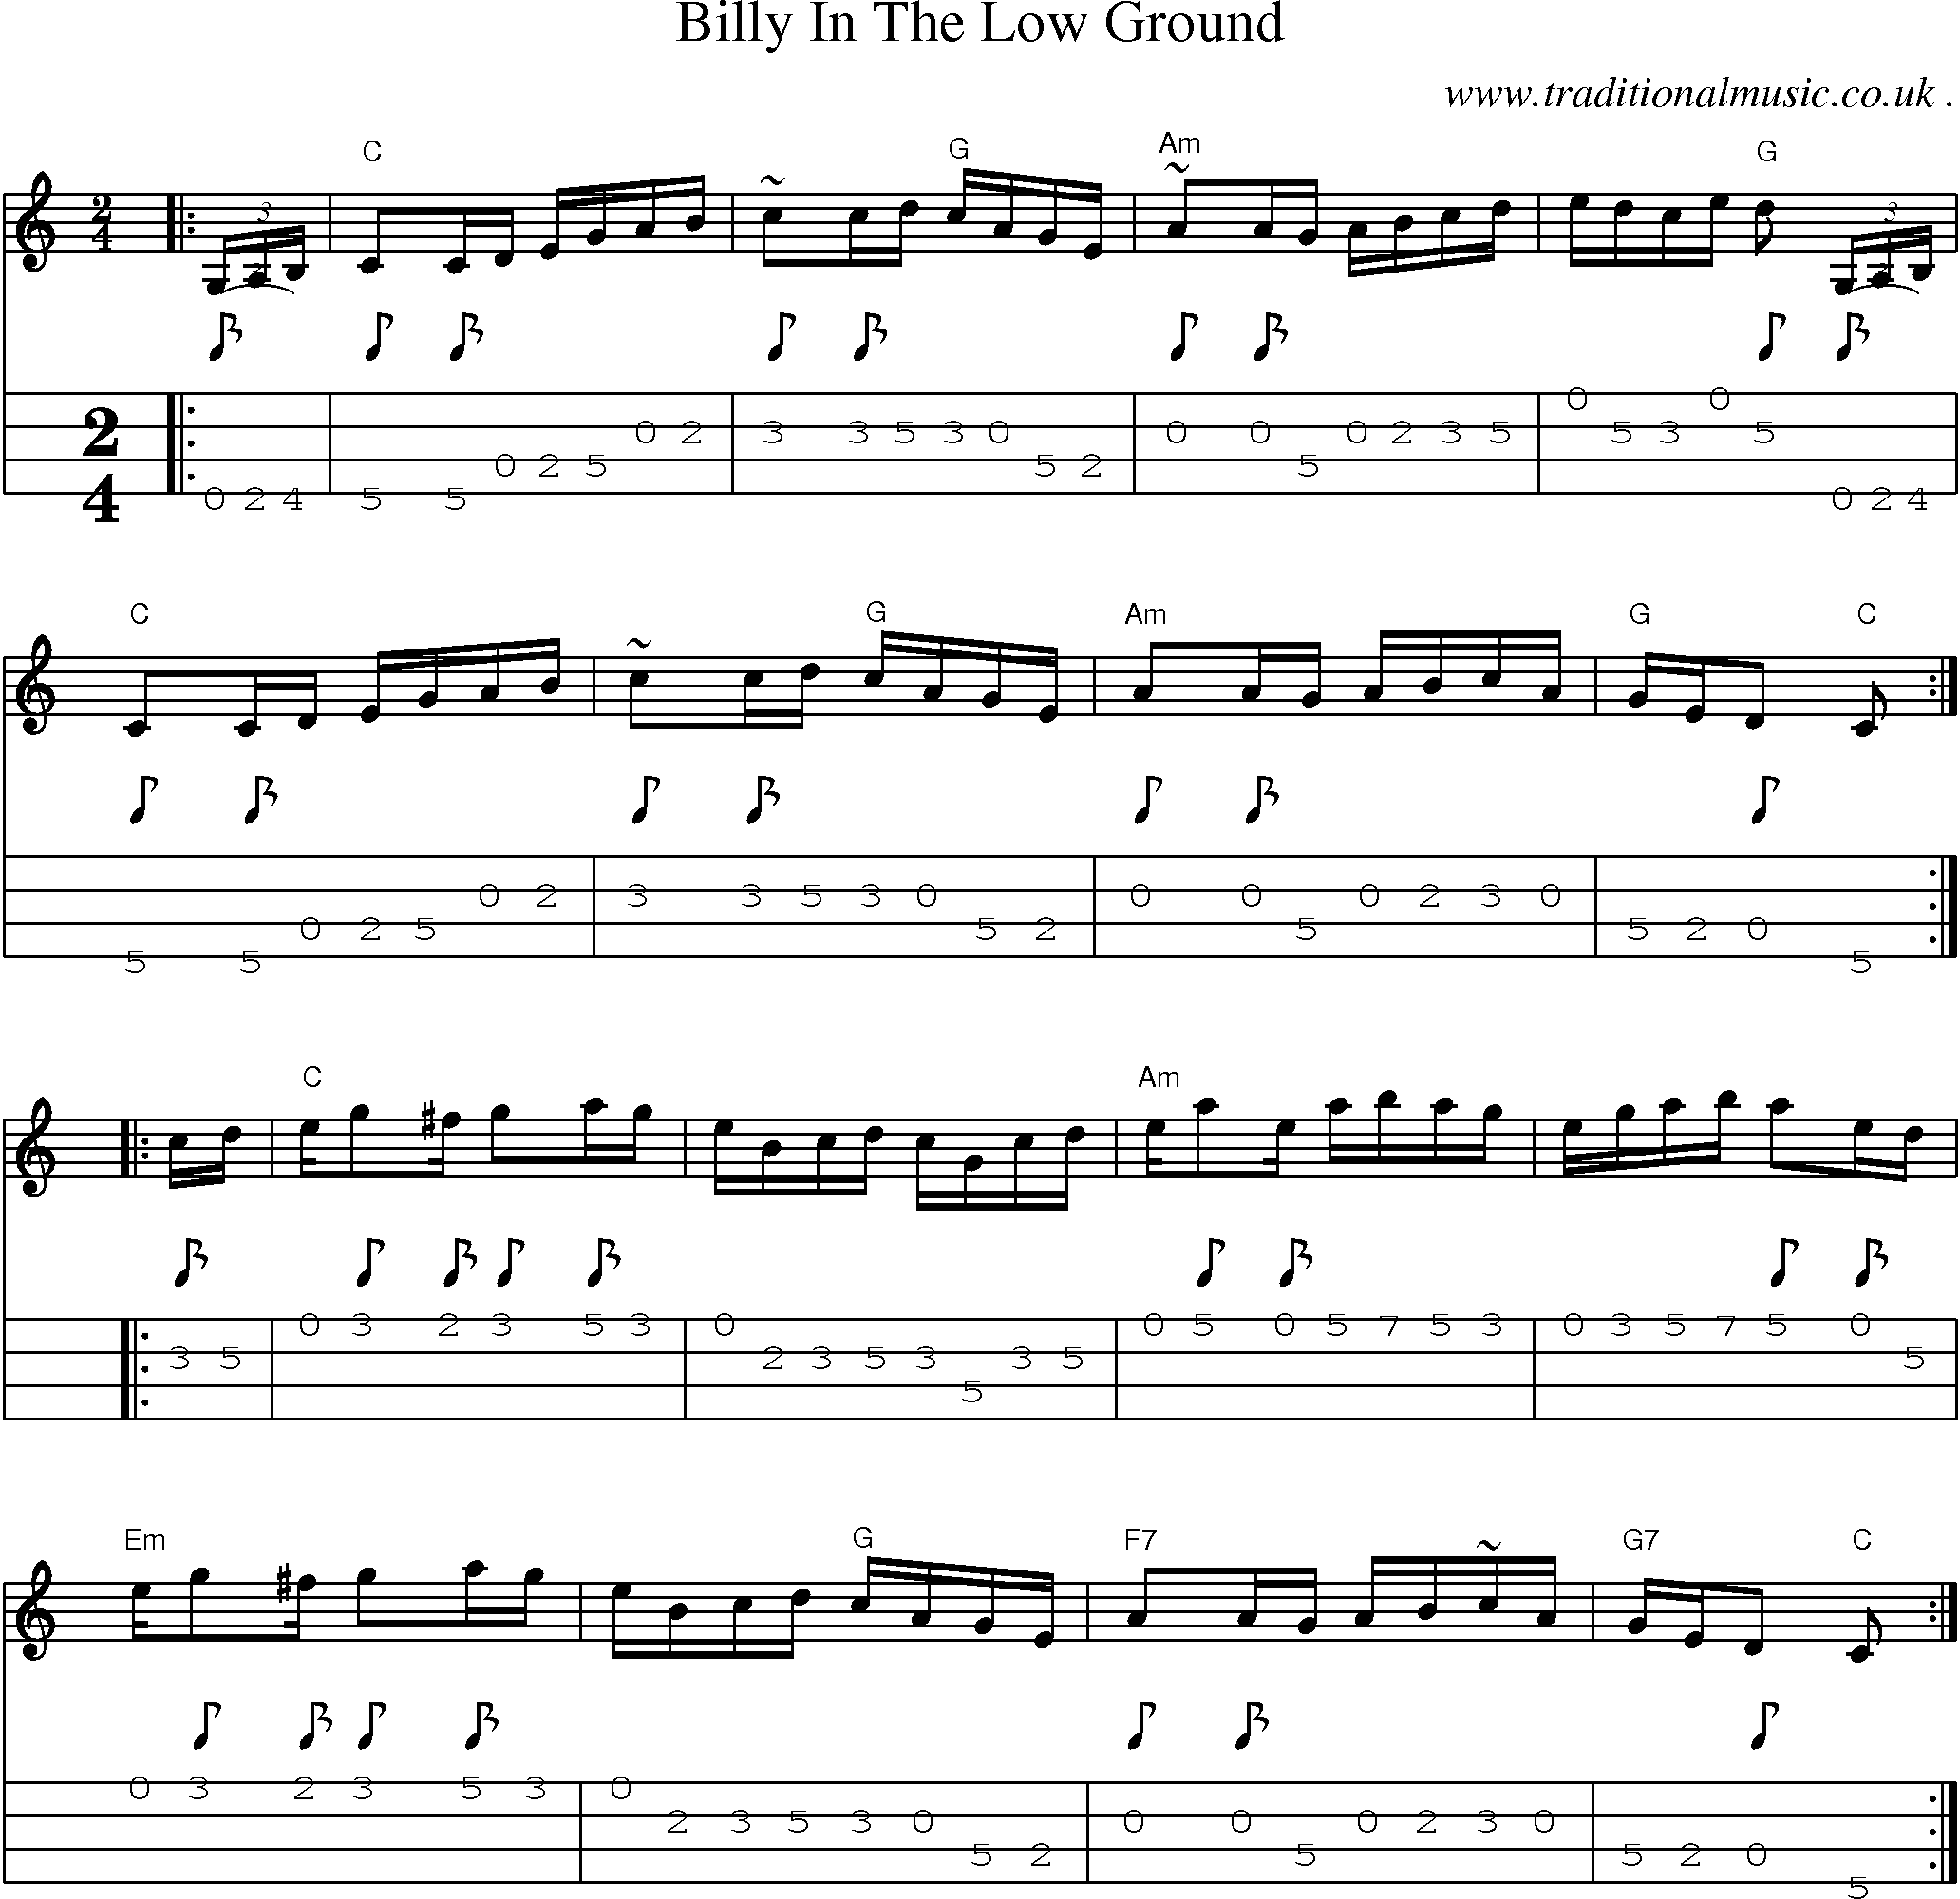 Music Score and Guitar Tabs for Billy In The Low Ground